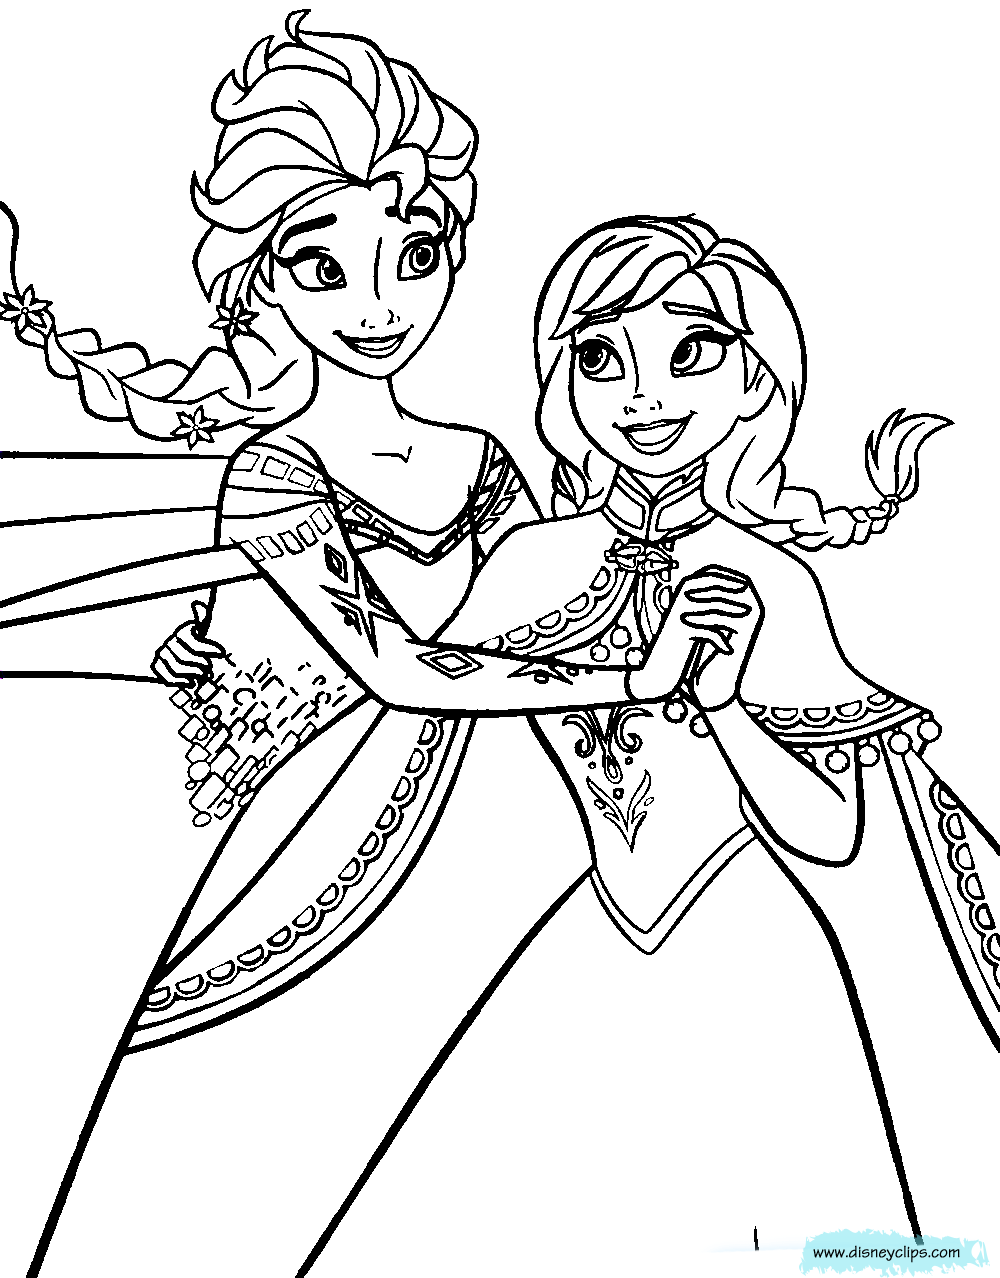 free coloring pages elsa and anna disney39s frozen coloring pages 2 disneyclipscom anna free and coloring elsa pages 